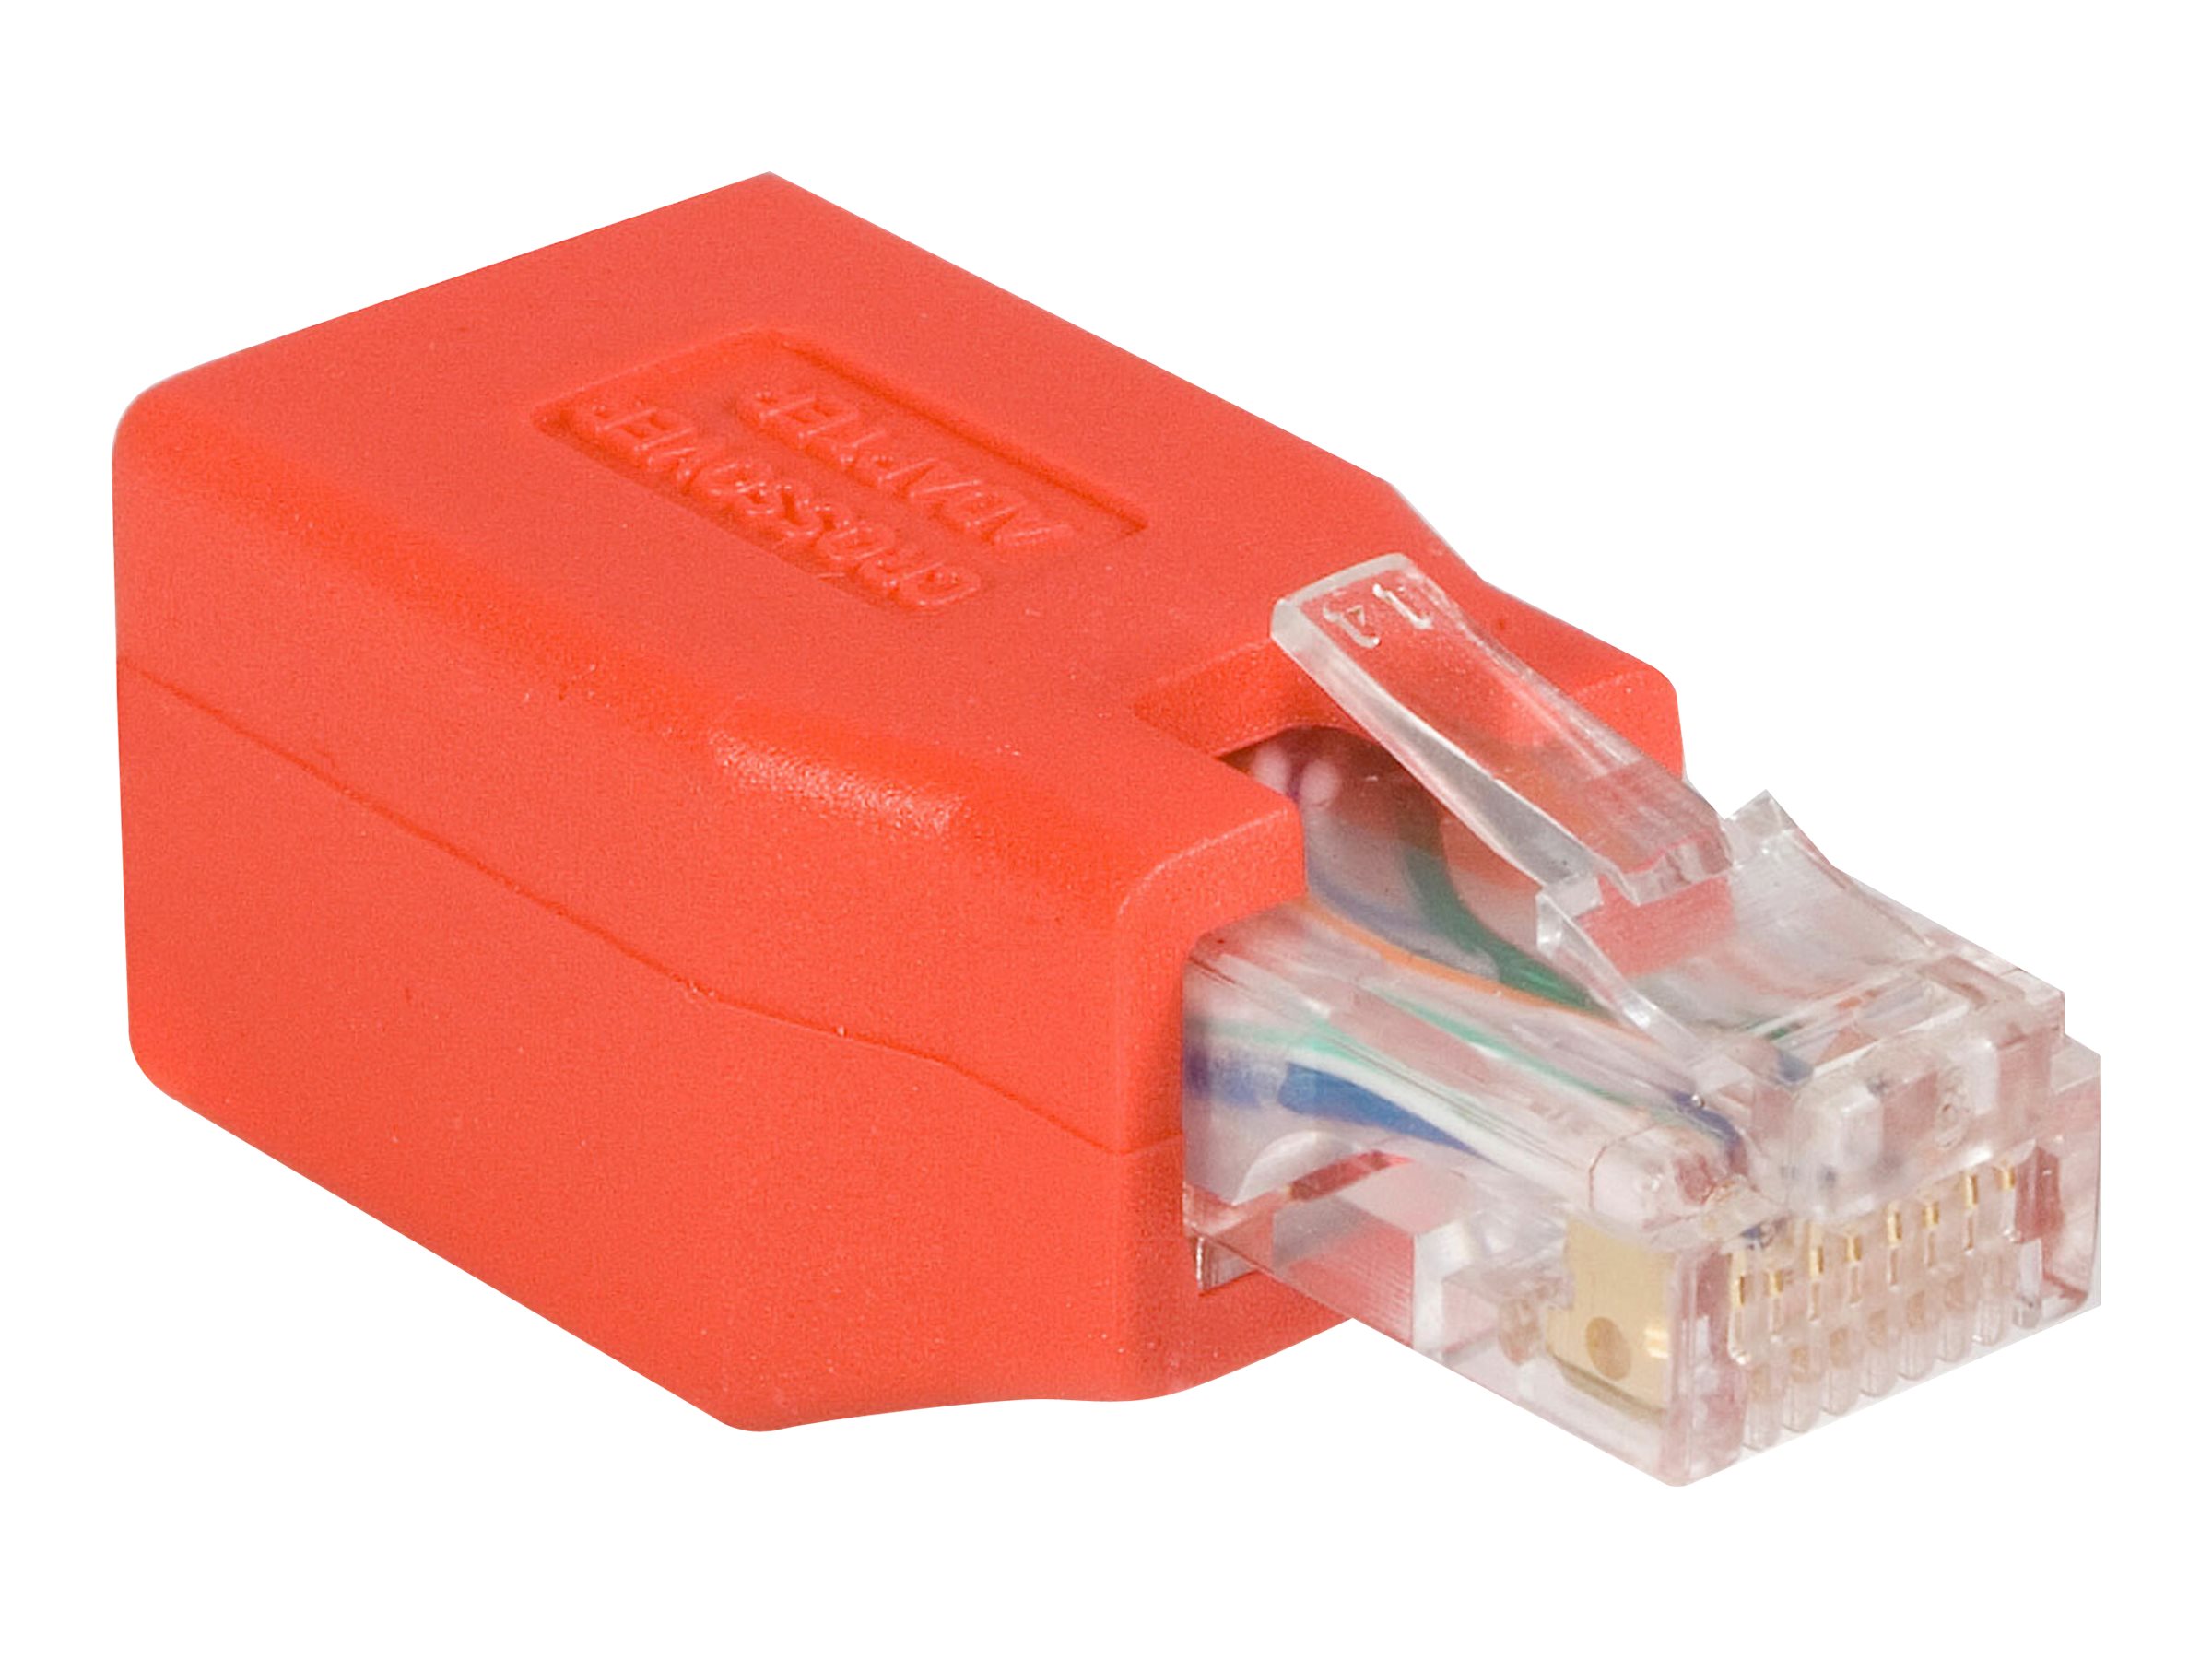 StarTech.com Cat6 Cable - Cat6 Crossover Adapter - GbE - Red - Ethernet Network Cable (C6CROSSOVER) - Crossover-Adapter